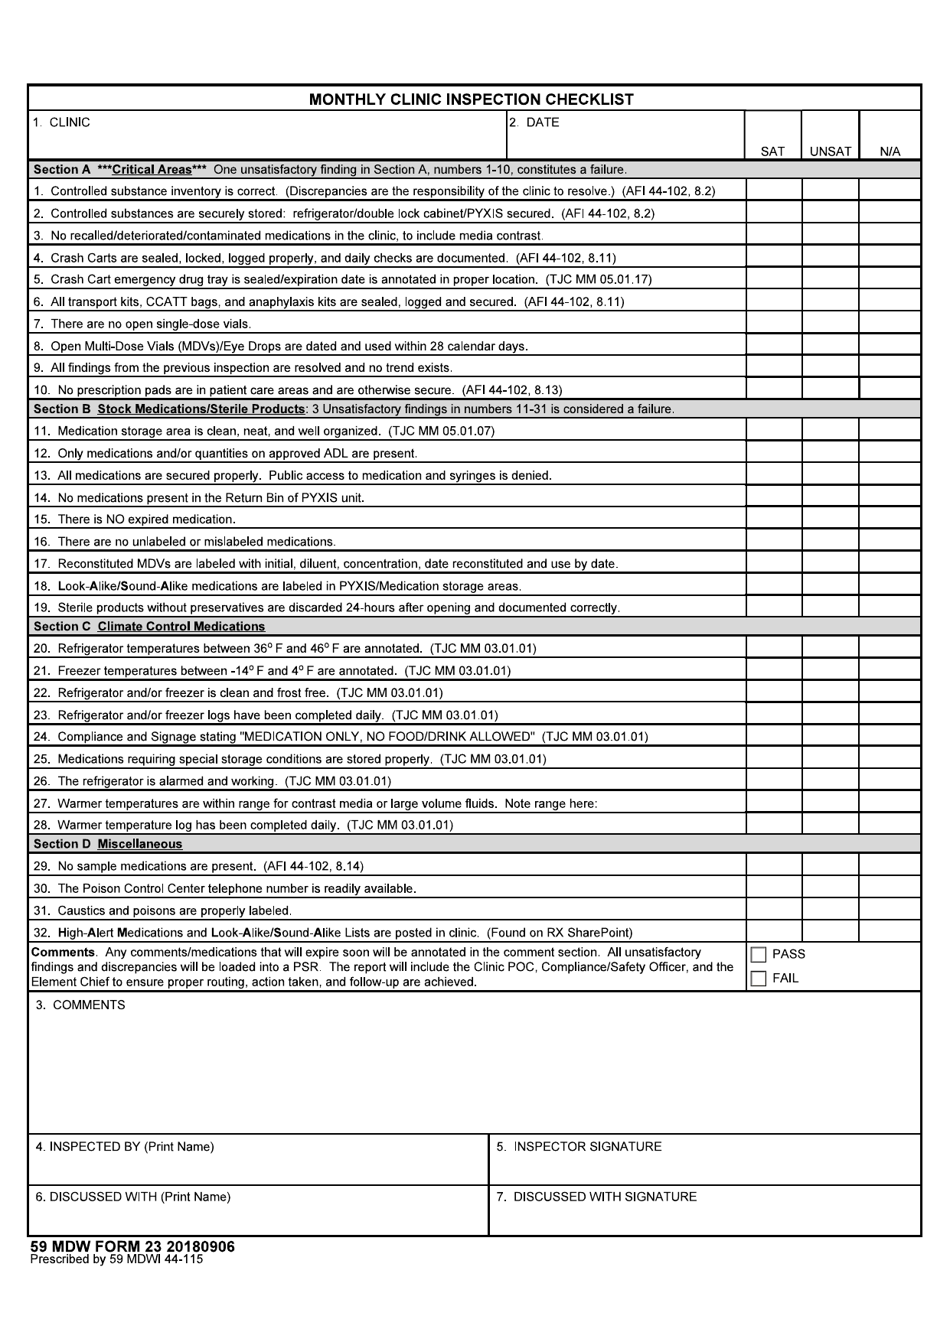 59 MDW Form 23 Monthly Clinic Inspection Checklist, Page 1